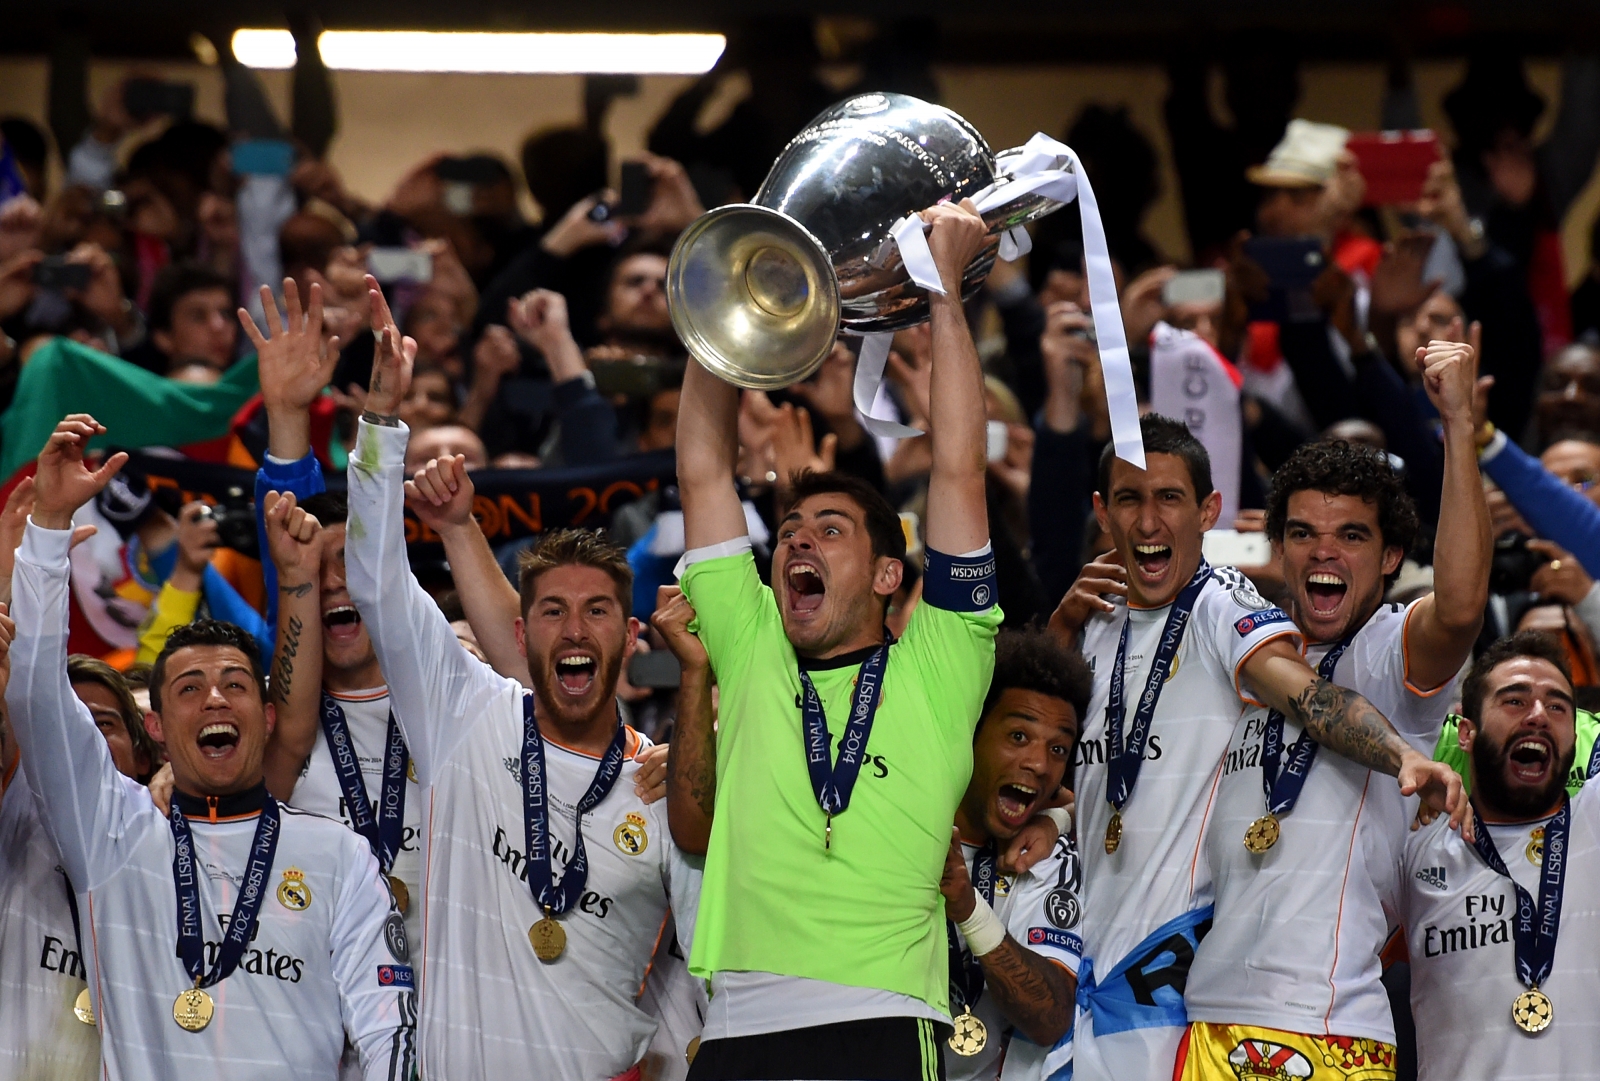 UEFA Champions League 2014/15 Group Stage Draw: Where to Watch Live